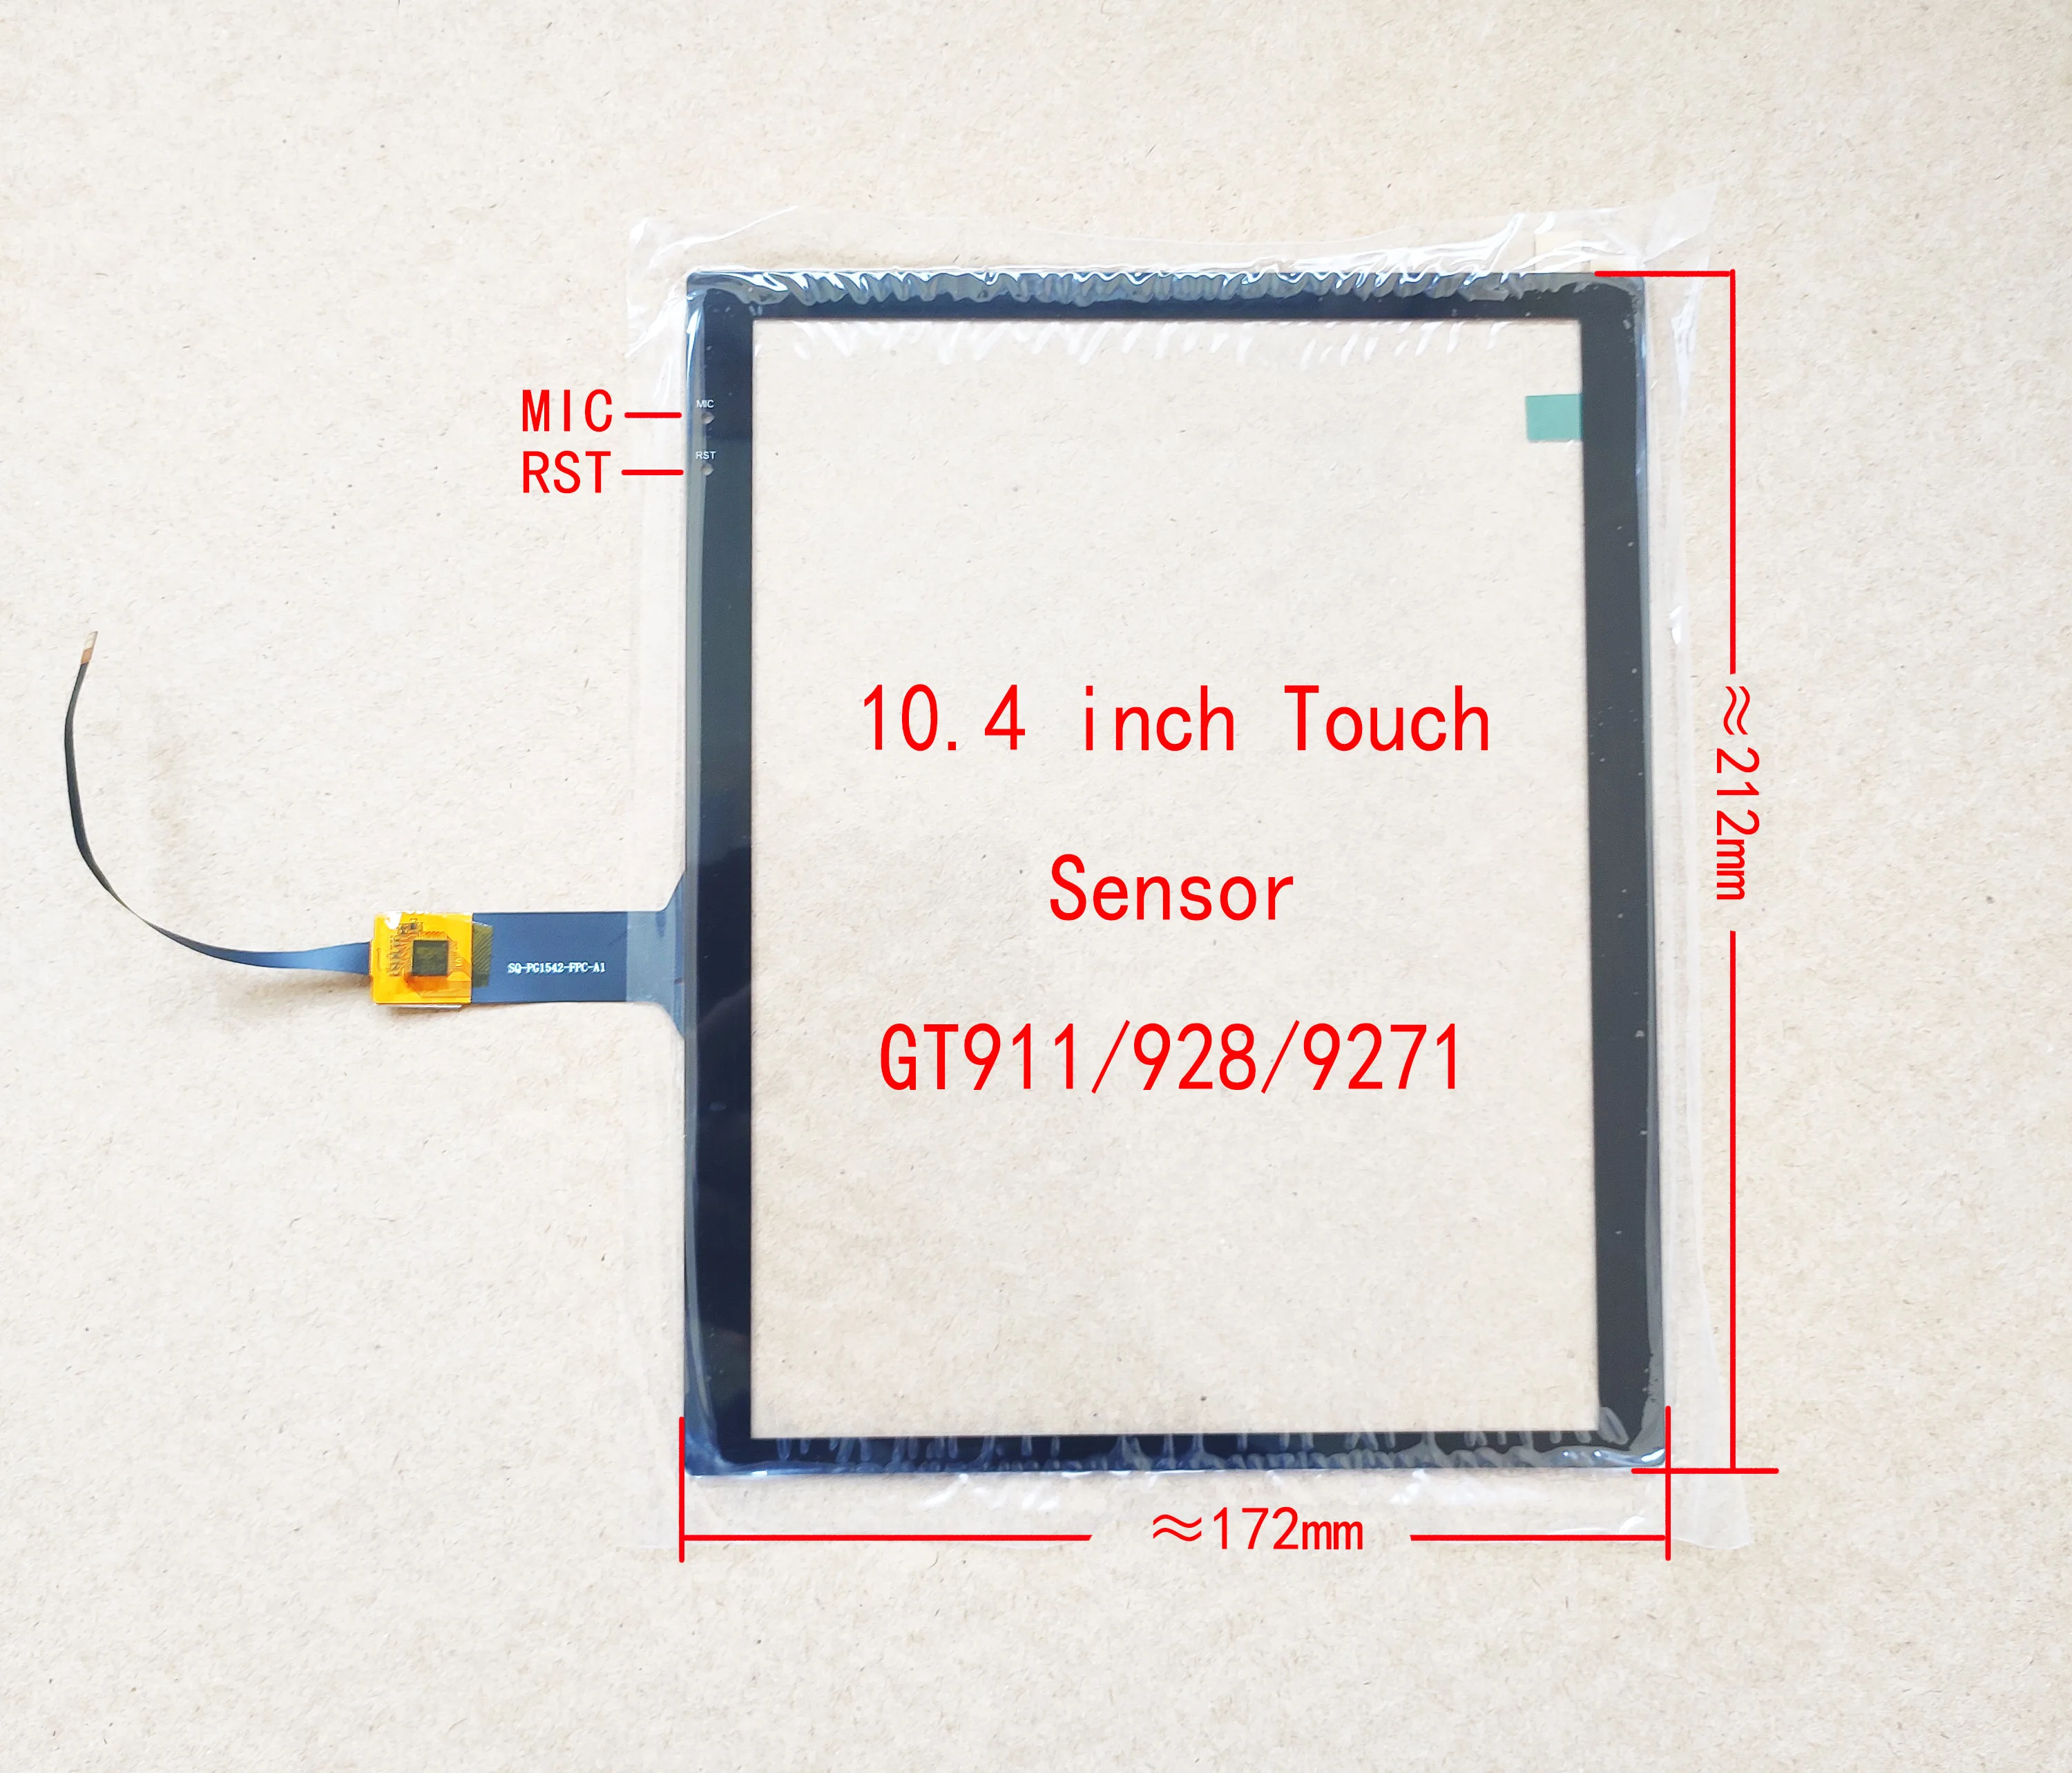 

10.4 inch touch screen sensor digitizer for Cruze 6pin dedicated GT911/GT928/GT9271 Universal SQ-PG1542-FPC-A1